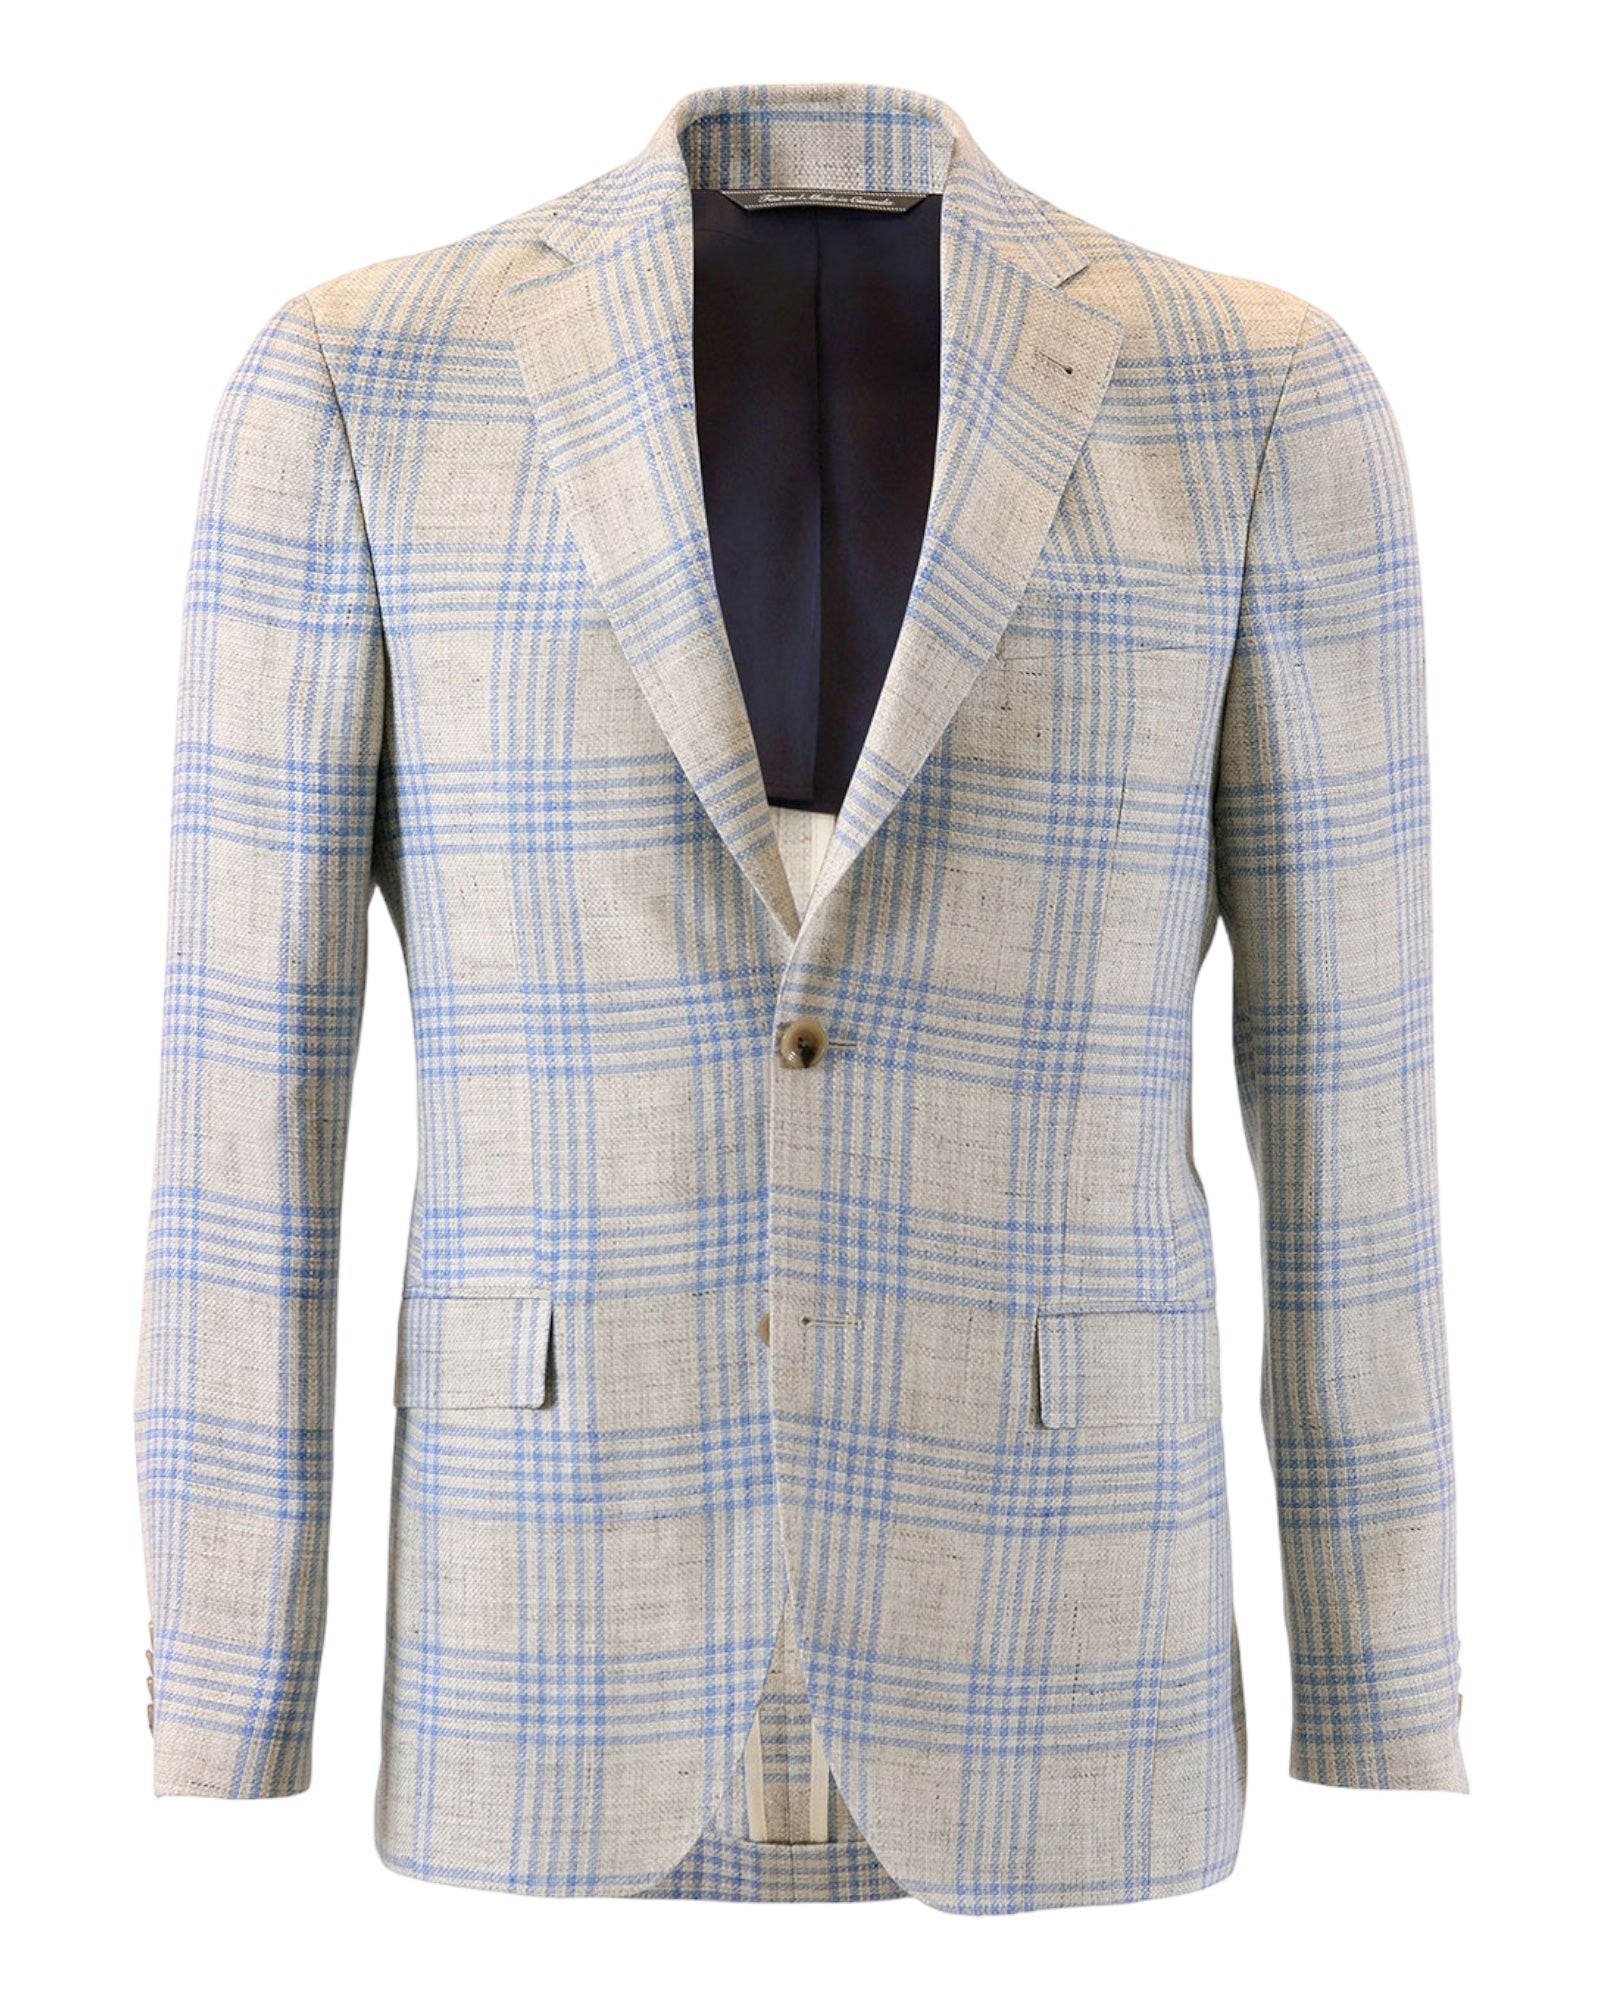 Linen & Wool Jacket - Off-White with Blue Glen Check JACKETS38R